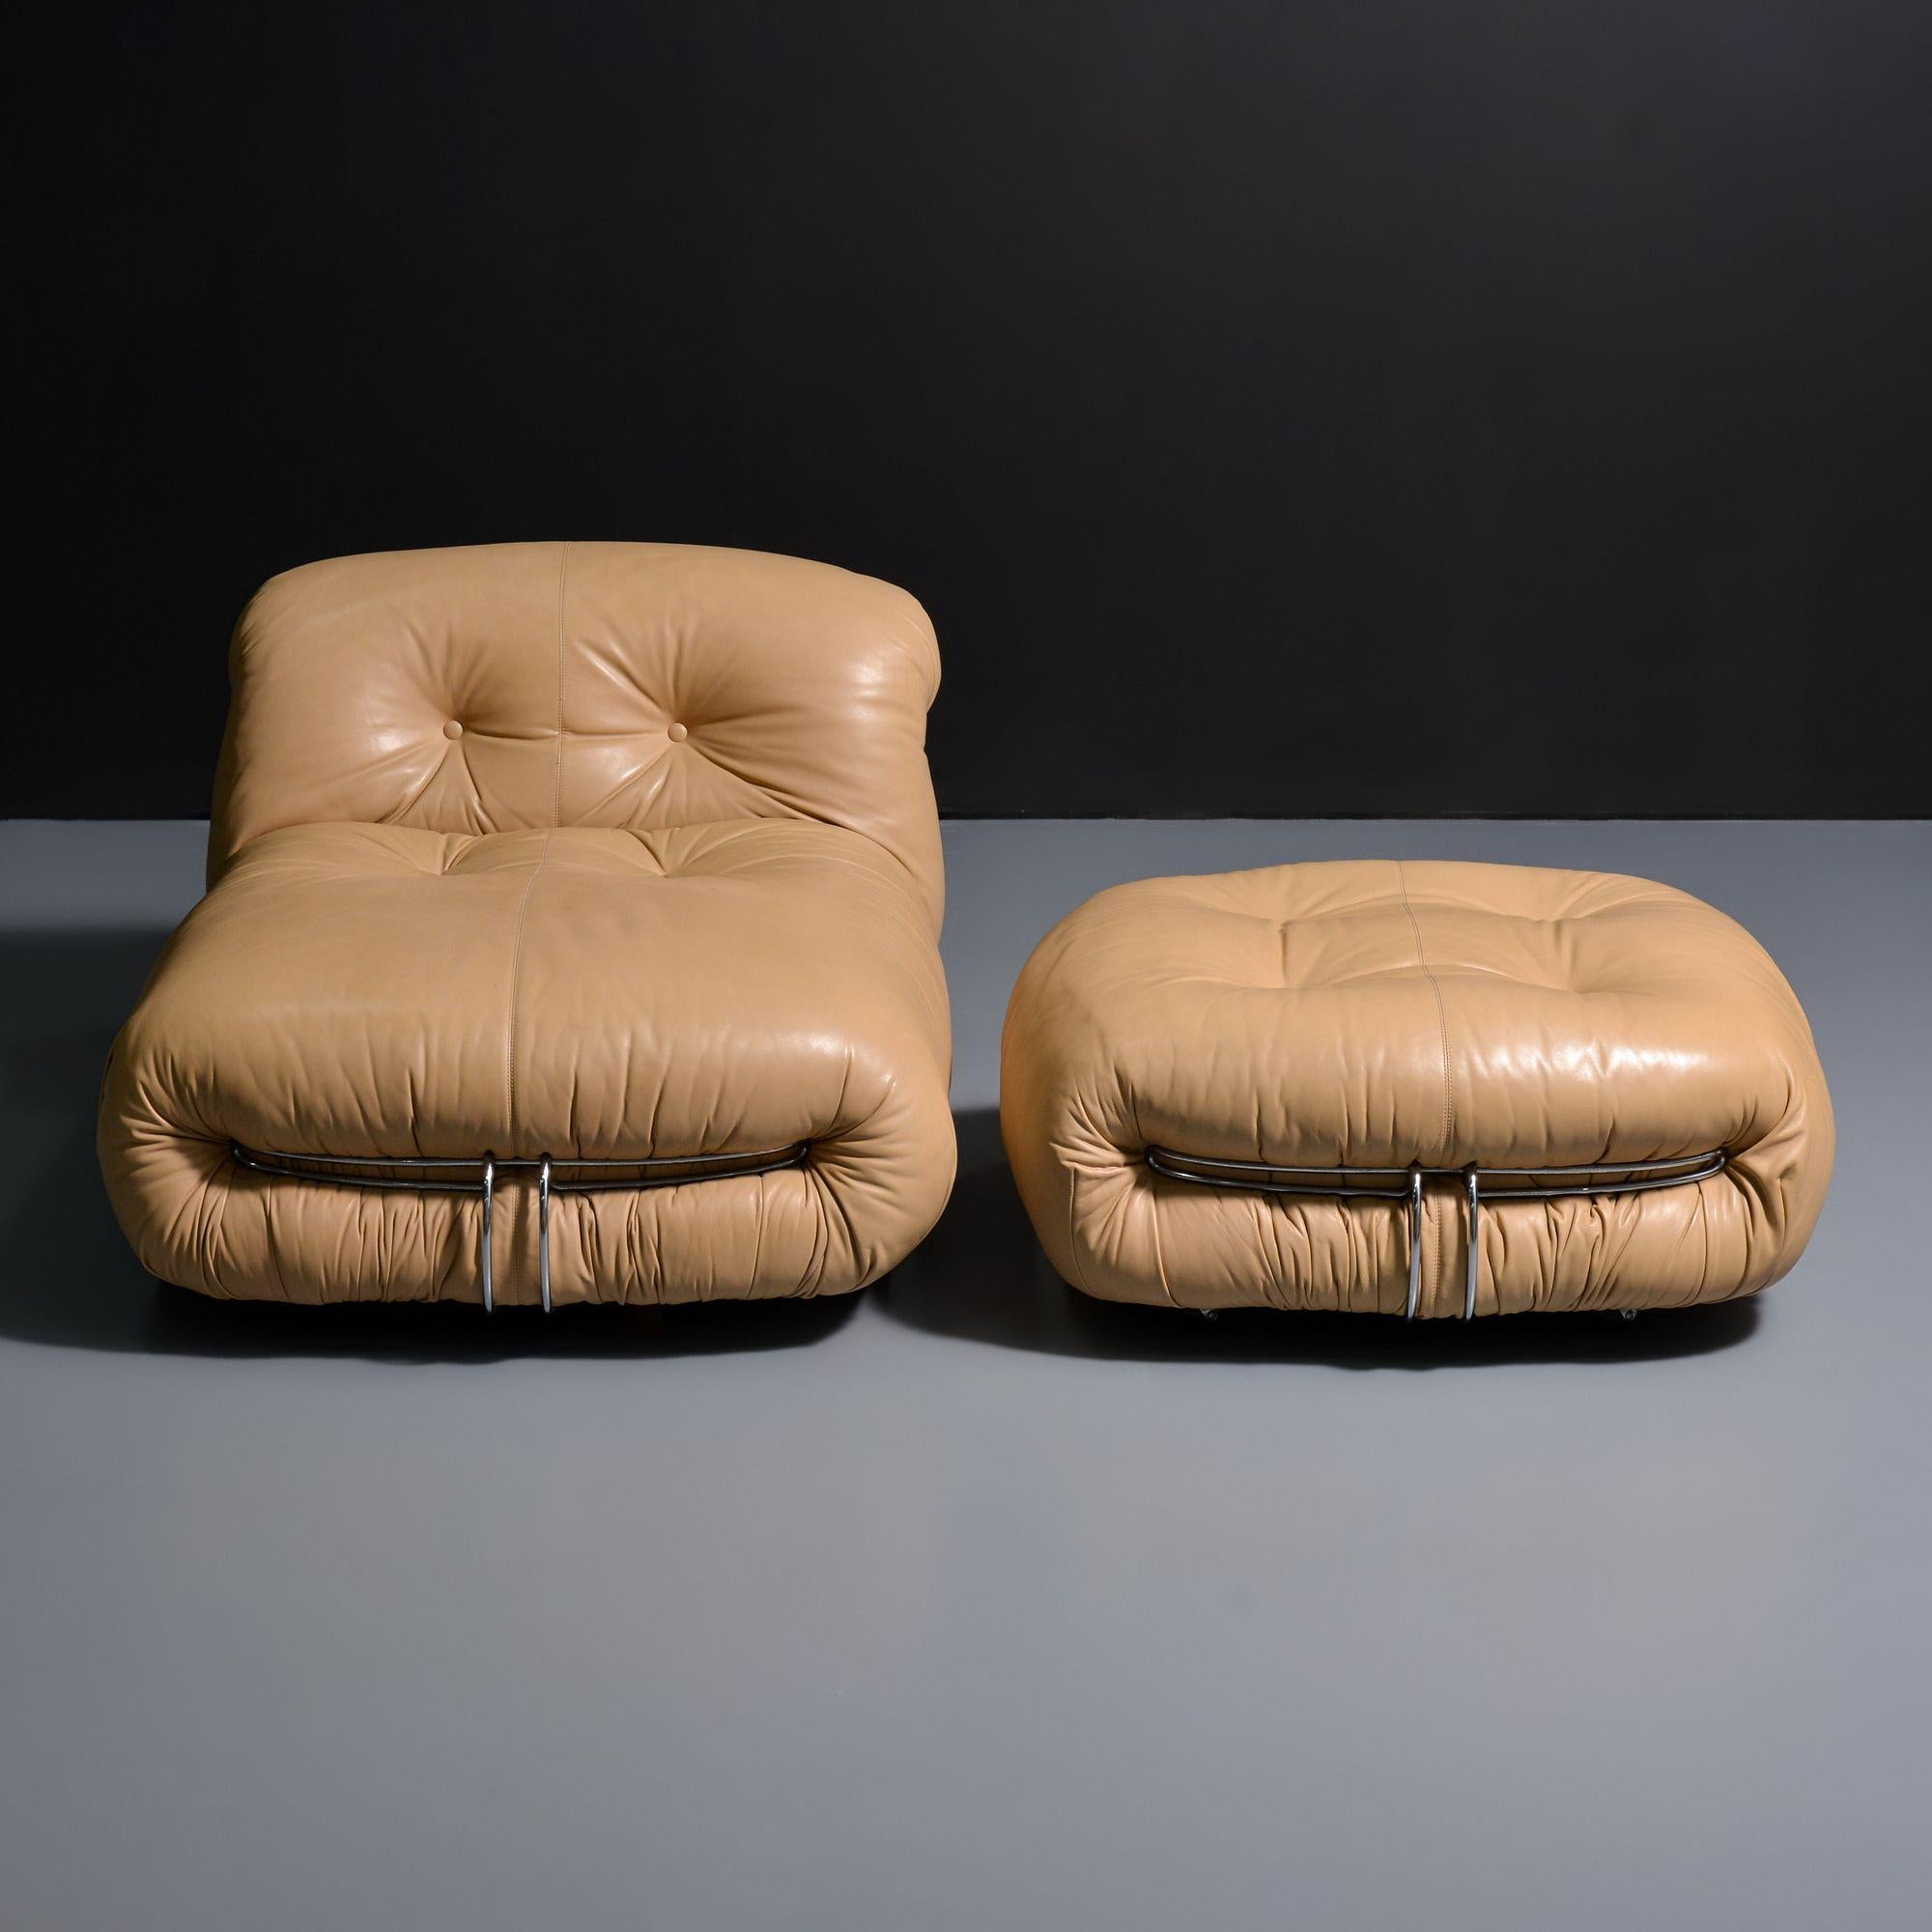 Italian Vintage Soriana Lounge Chair & Ottoman by Afra & Tobia Scarpa in Leather, 1970 For Sale